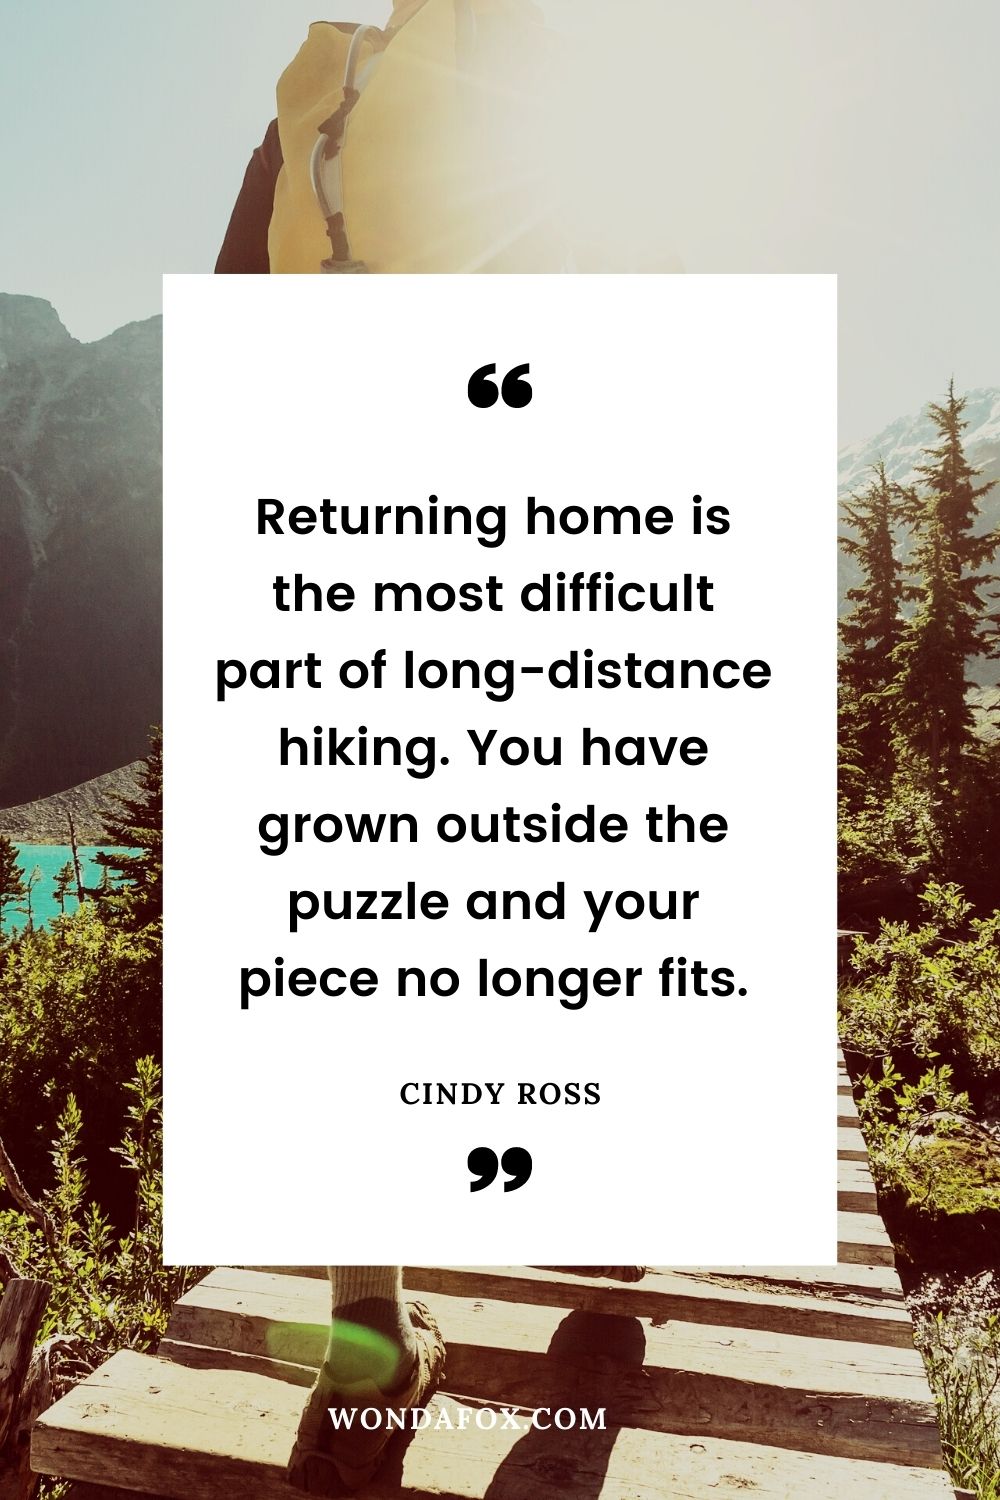 Returning home is the most difficult part of long-distance hiking. You have grown outside the puzzle and your piece no longer fits.